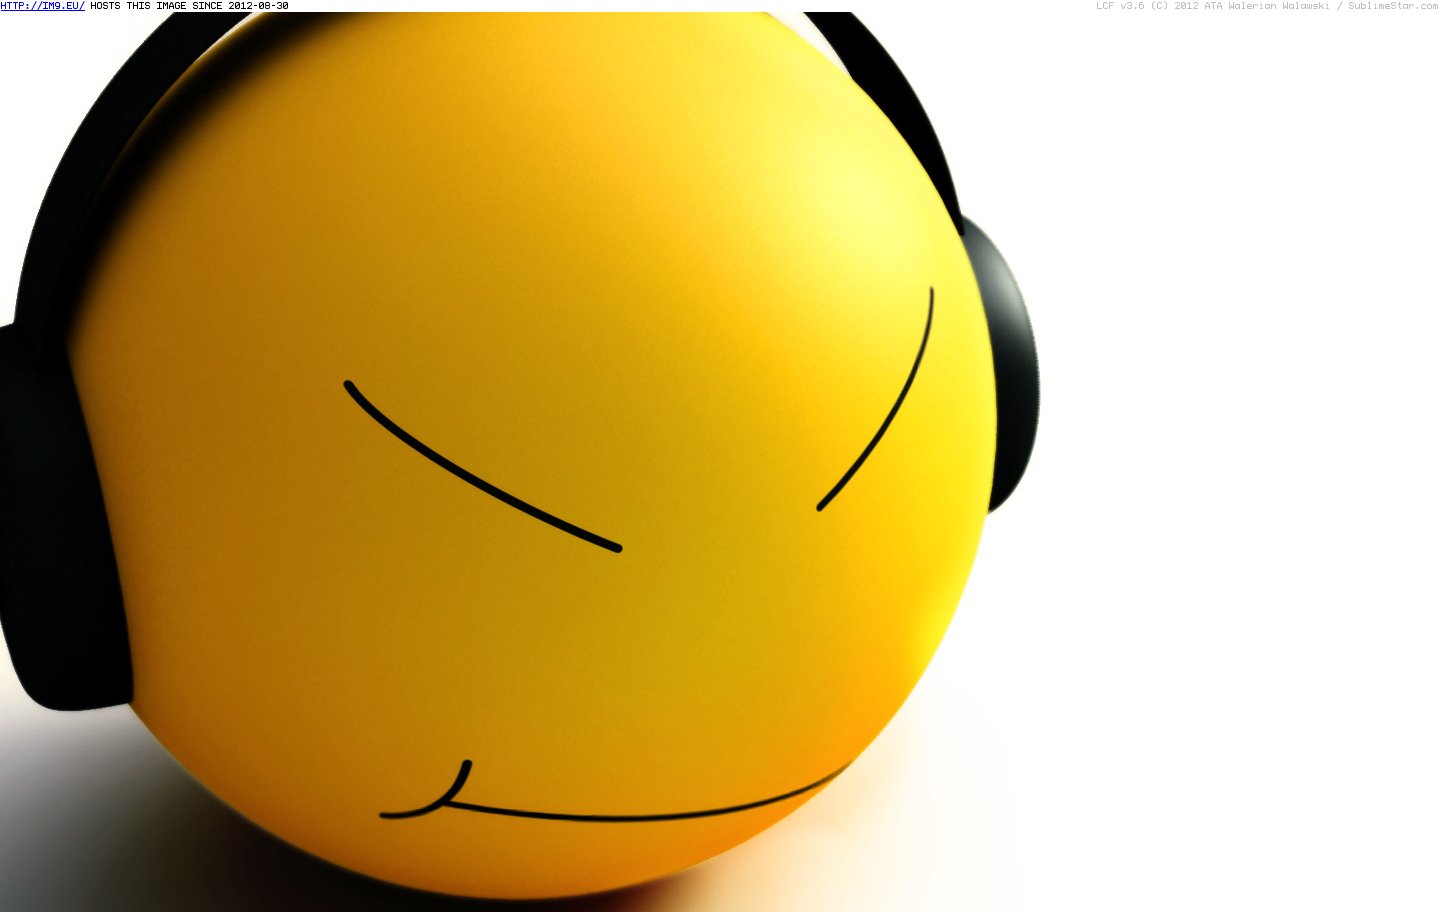 Miusic Time (smiley wallpaper) (in Smiley Wallpapers)